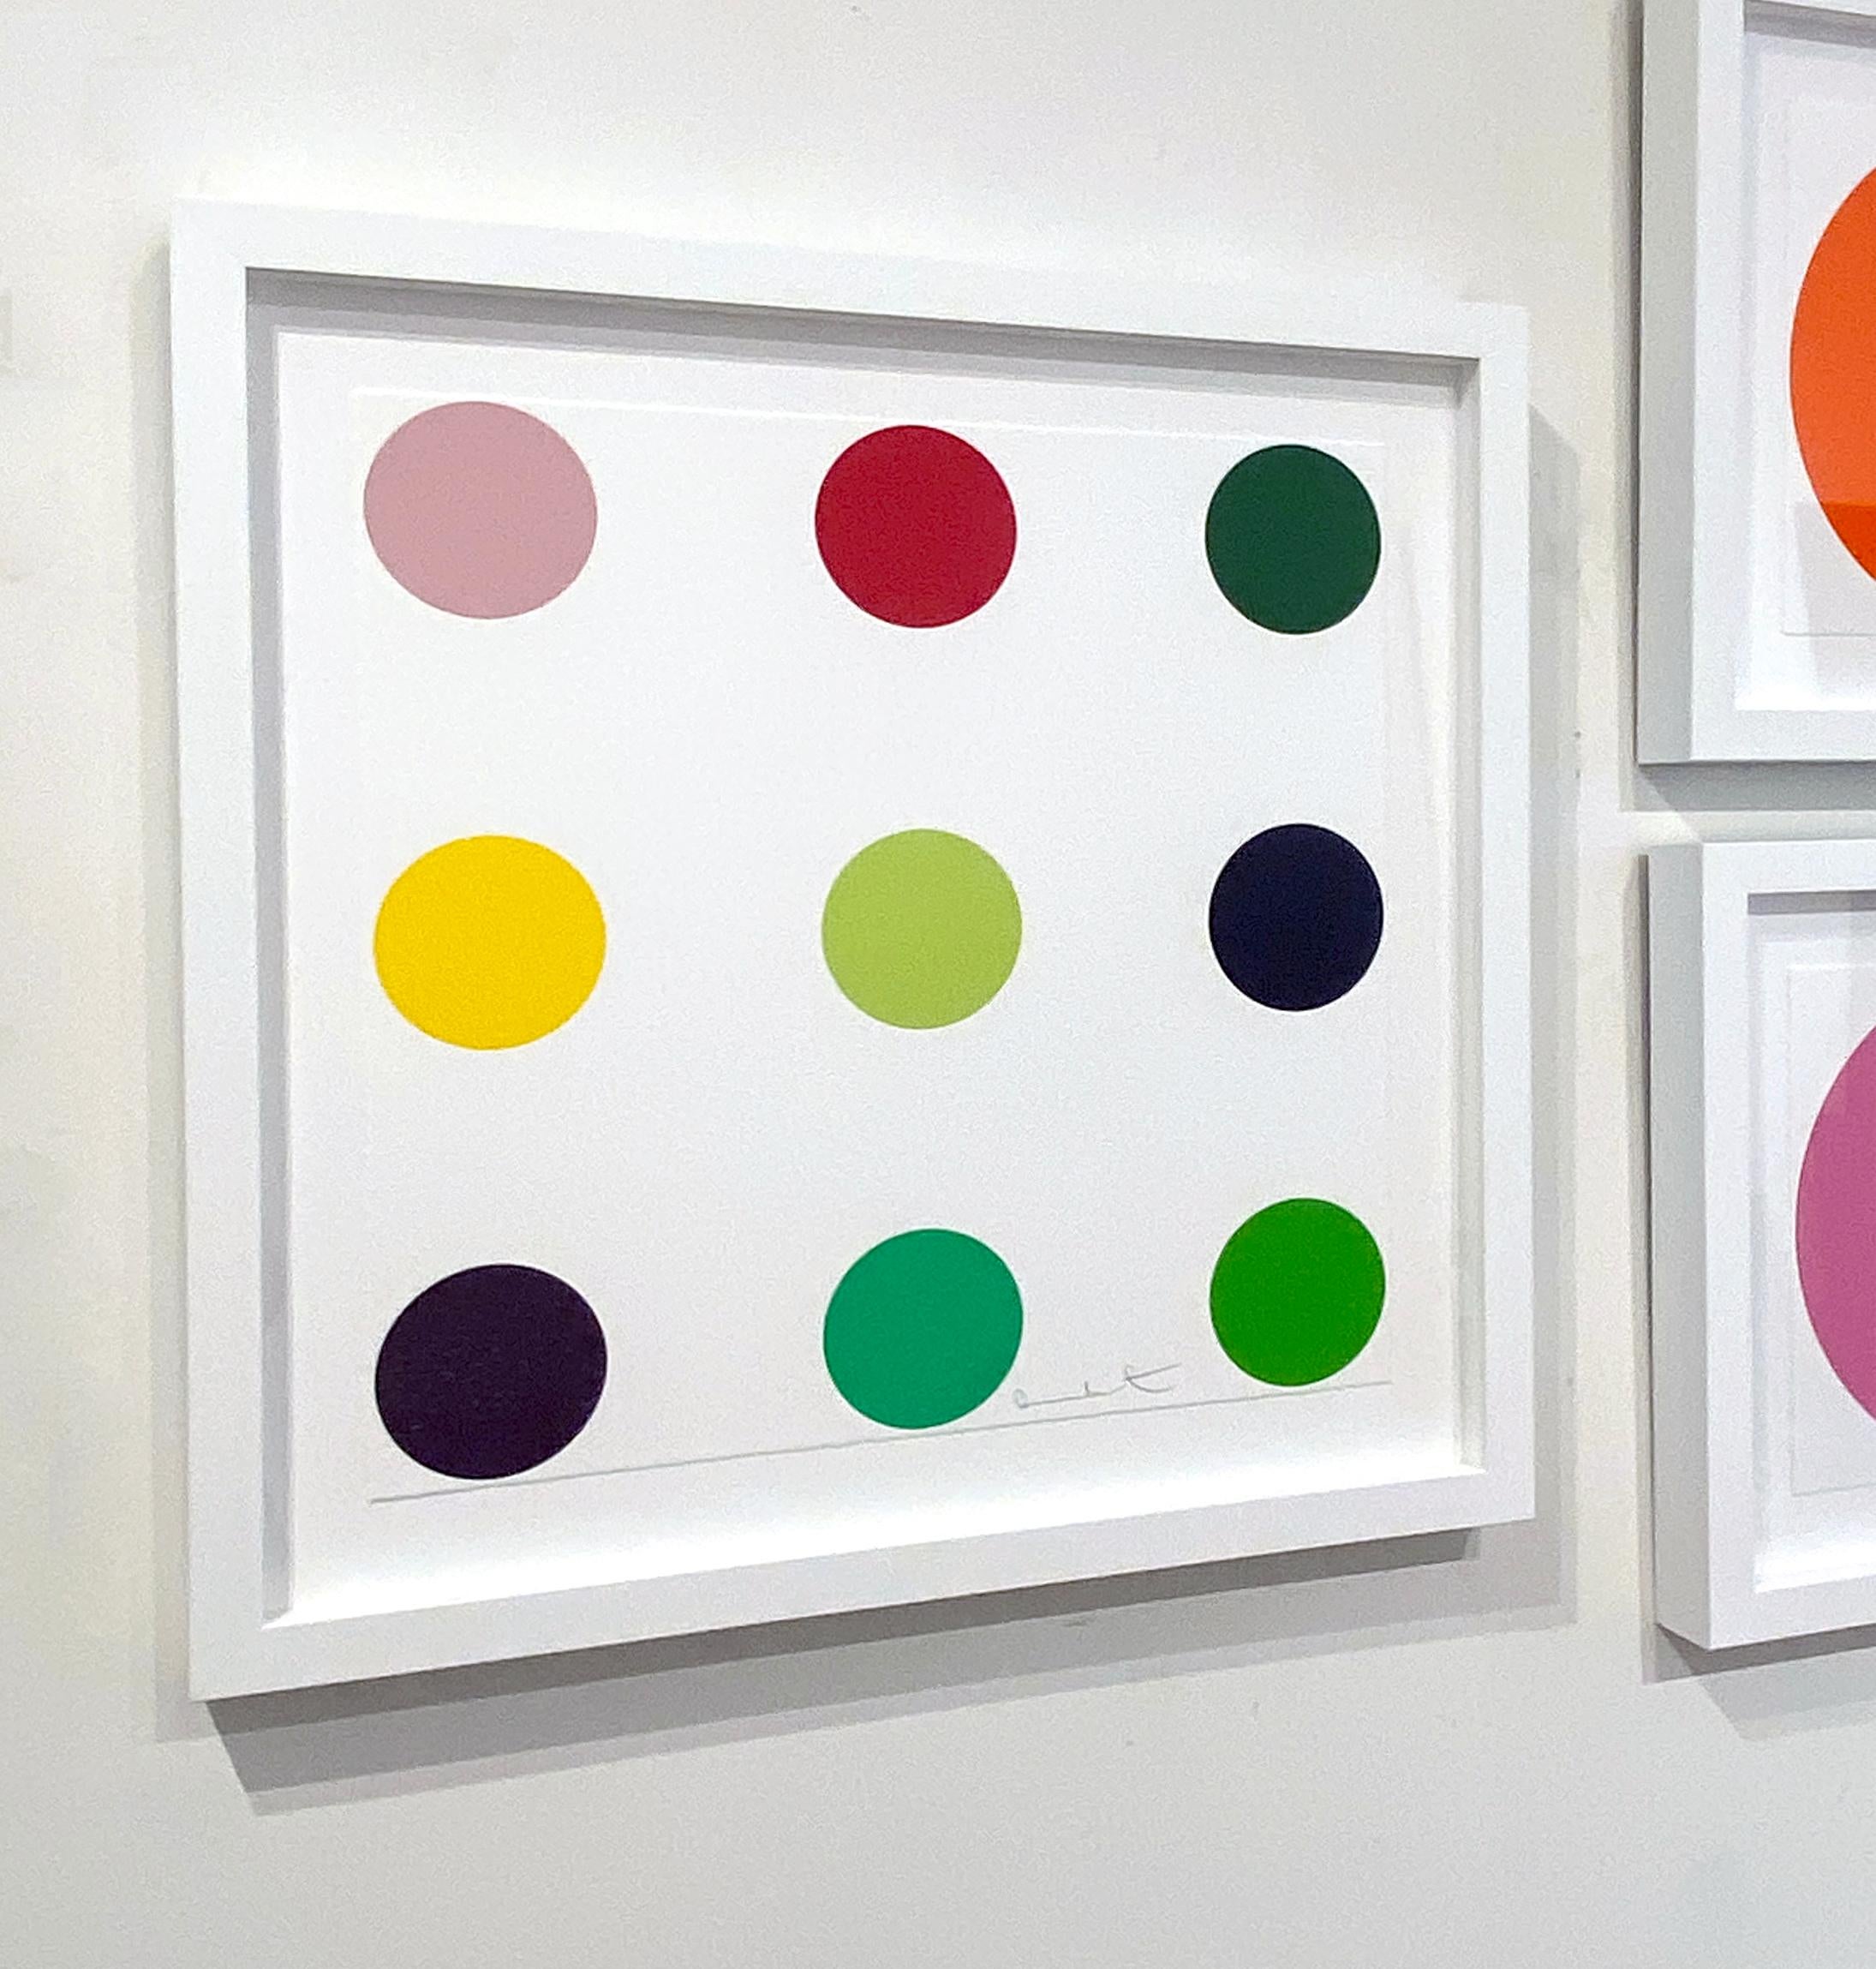 Phenformin - Young British Artists (YBA) Print by Damien Hirst